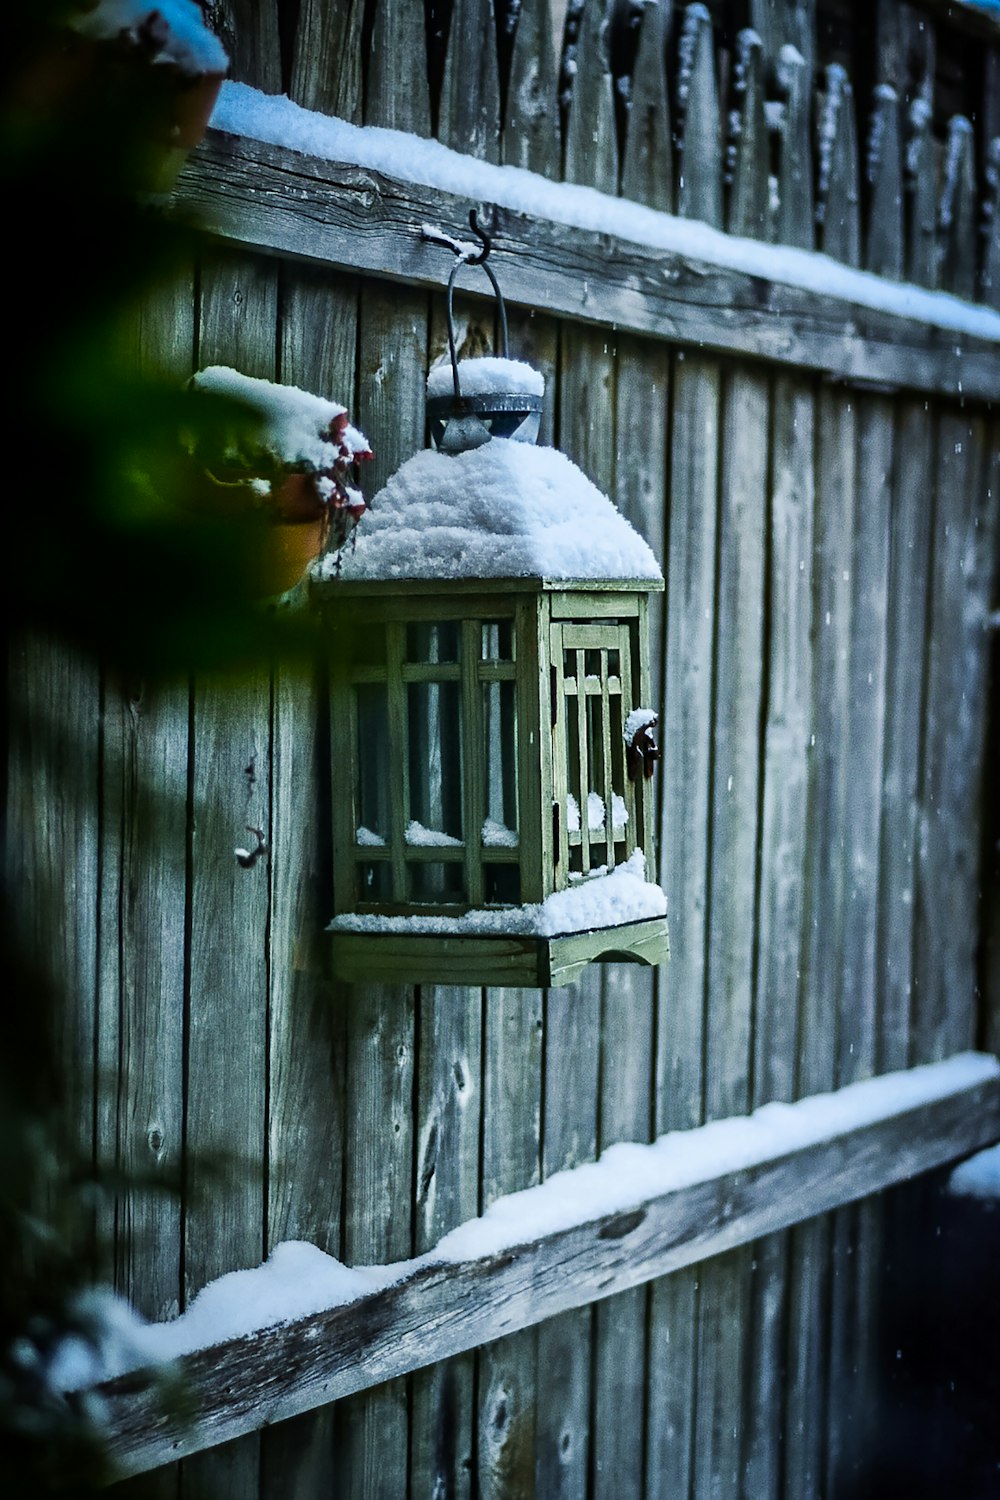 a bird feeder hanging from the side of a wooden fence